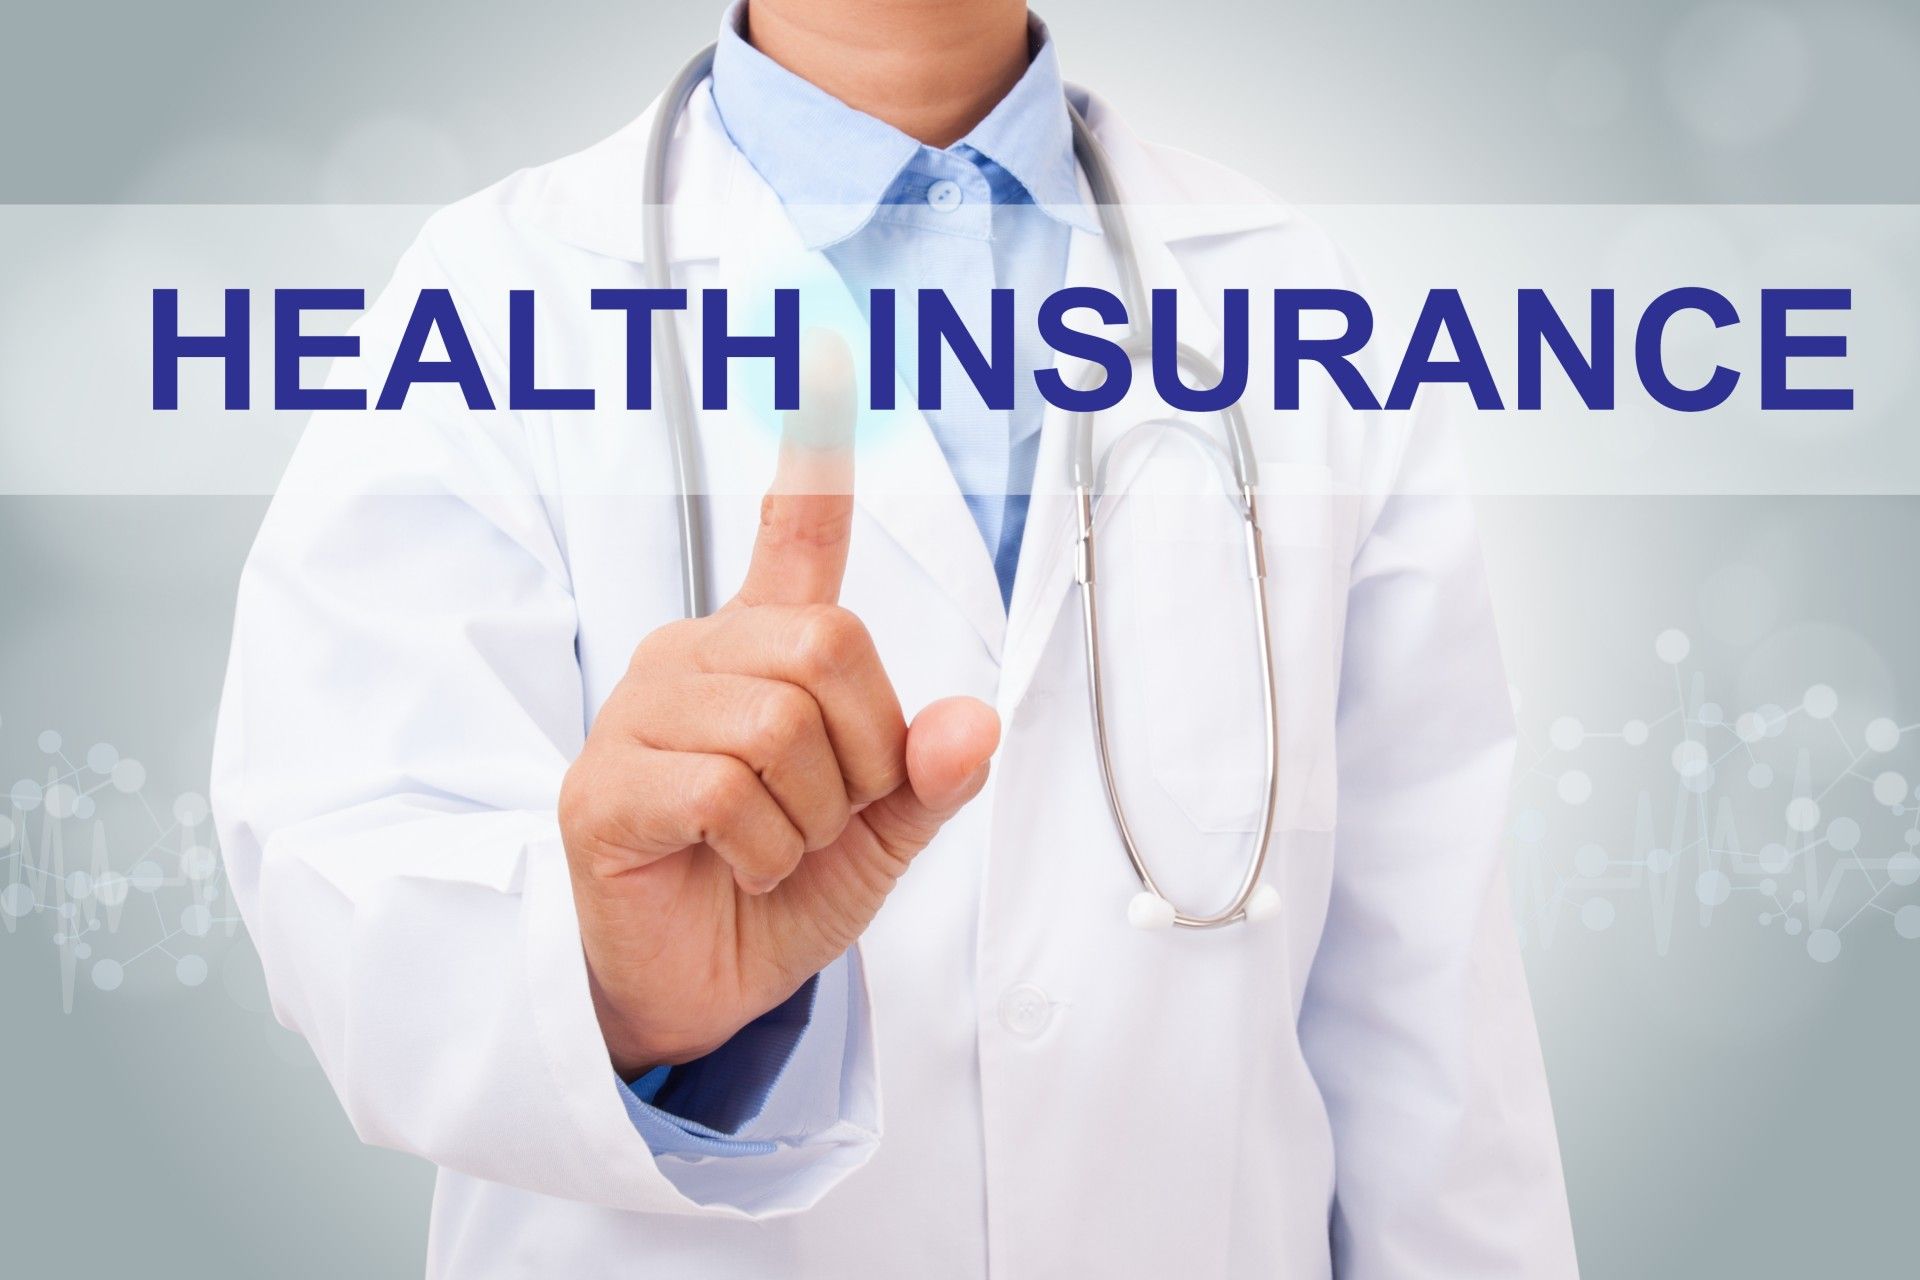 A doctor with a stethoscope around his neck points at a "health insurance" graphic in front of him